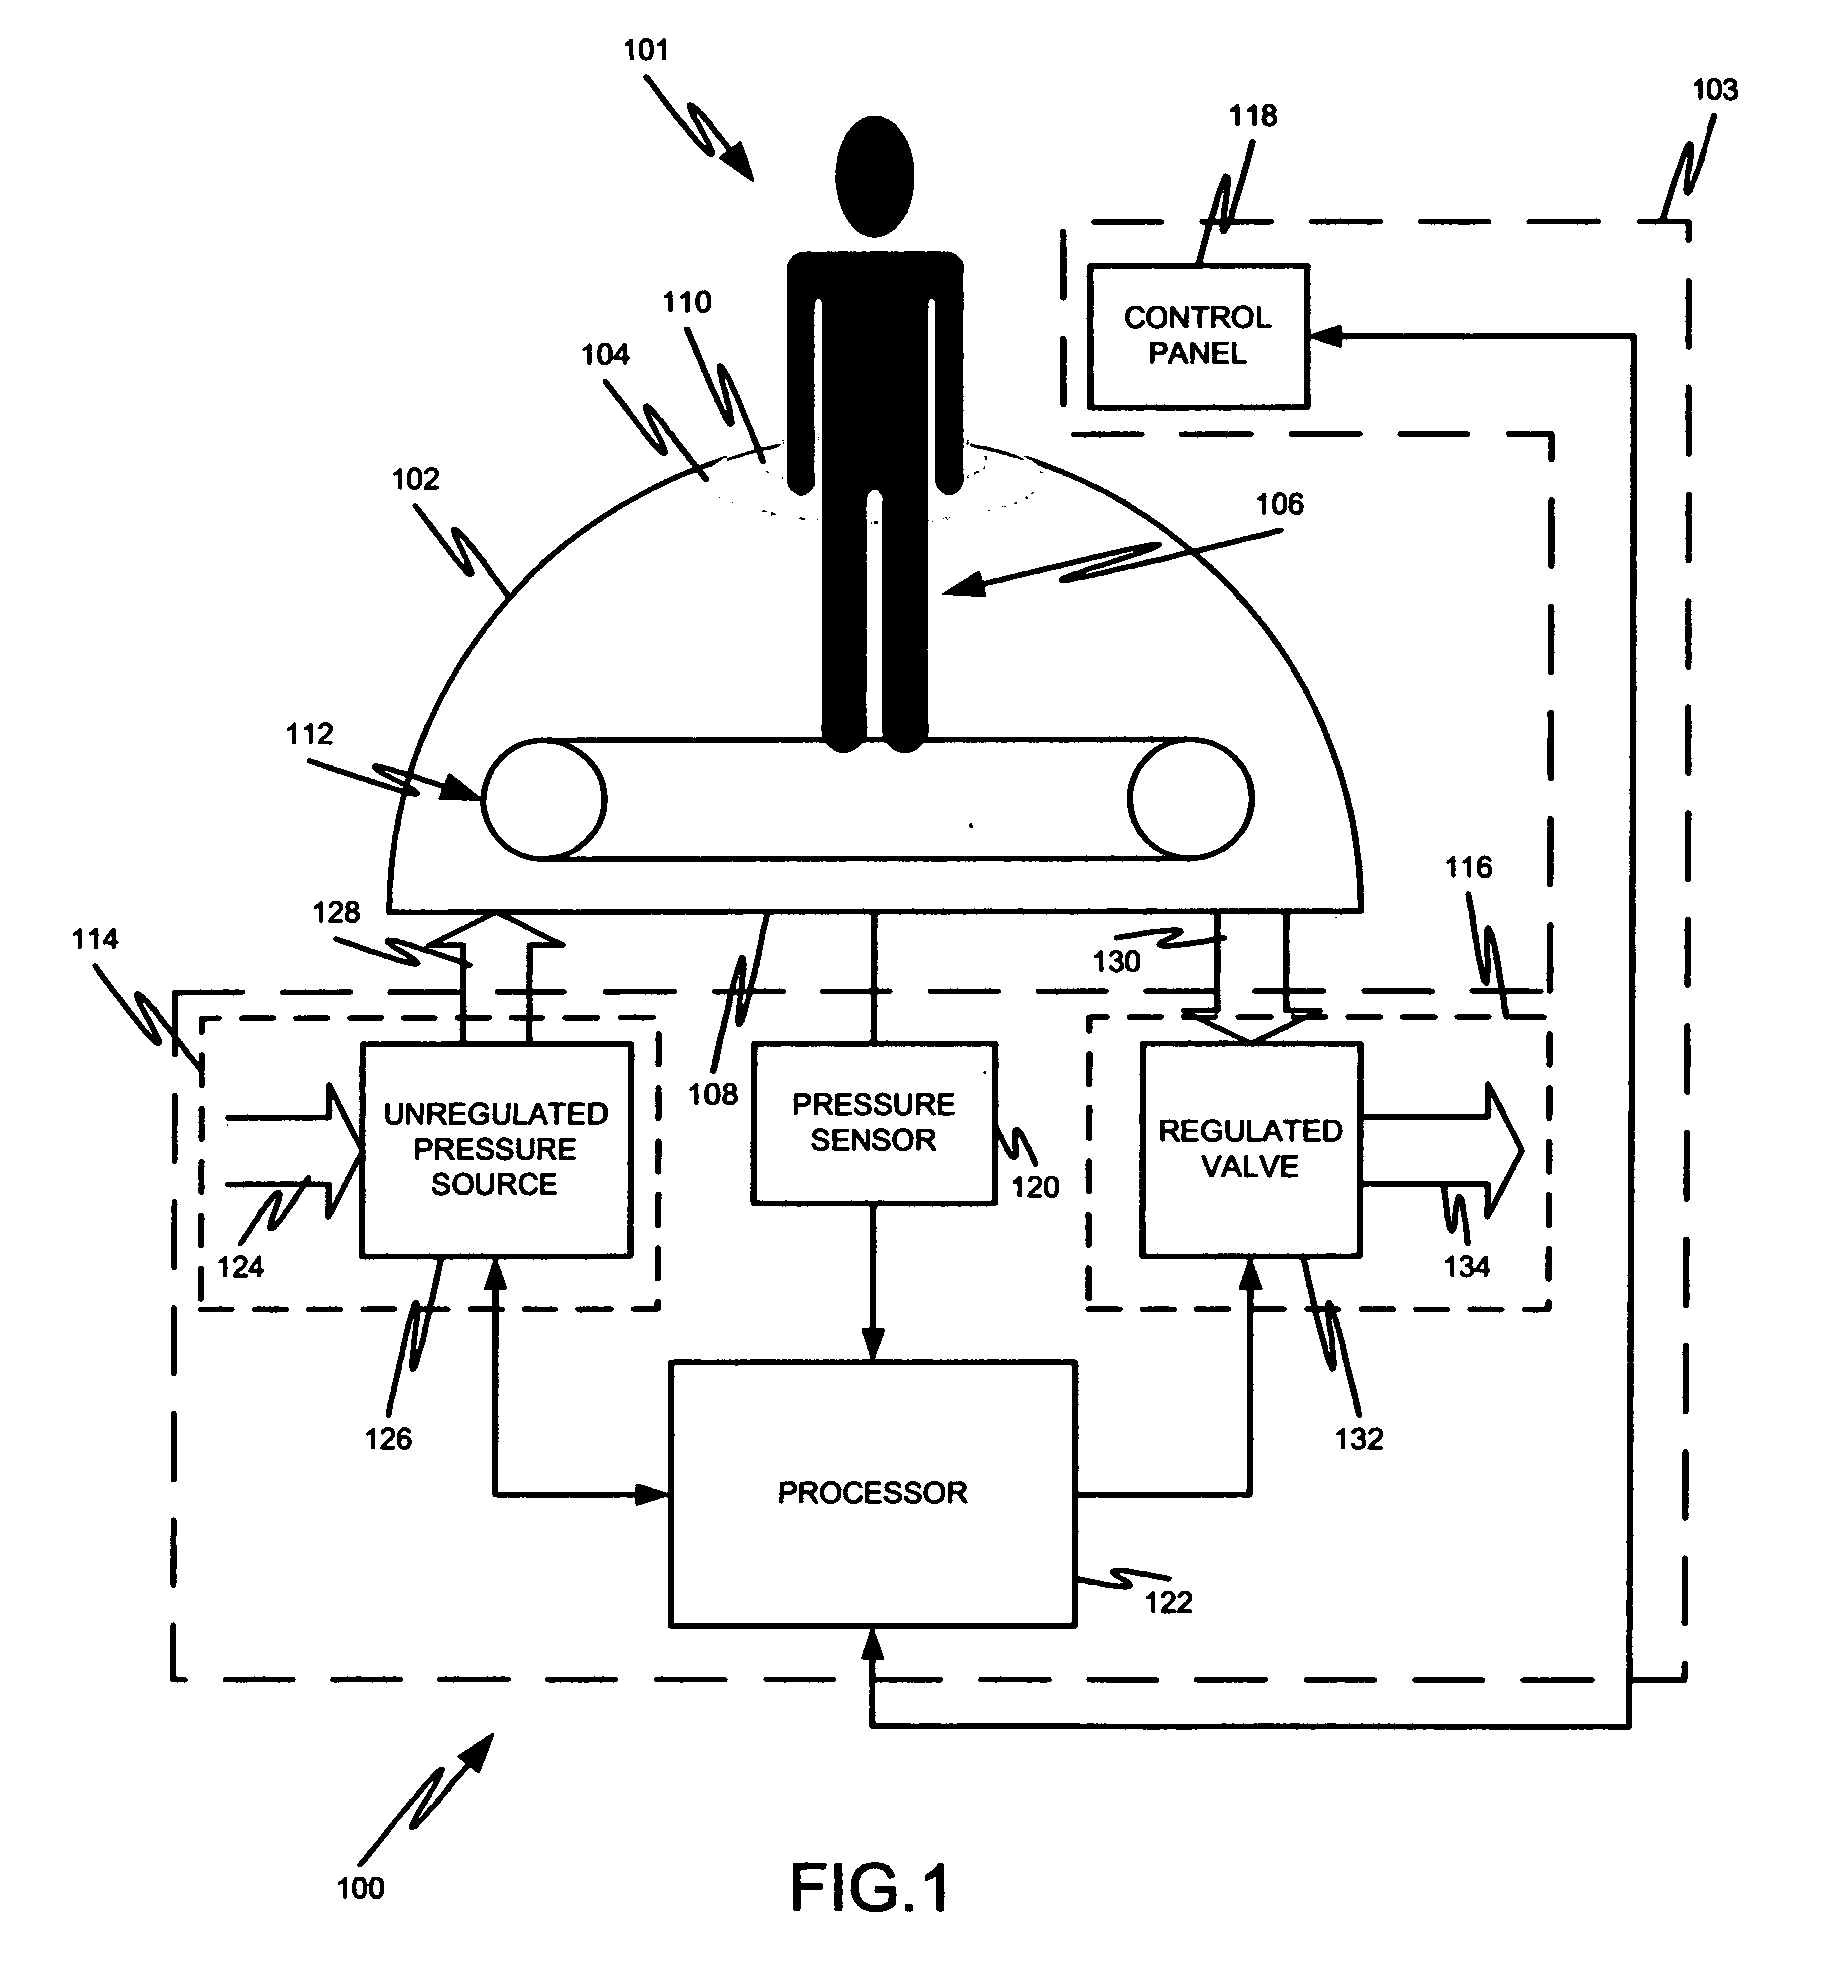 System, method and apparatus for applying air pressure on a portion of the body of an individual